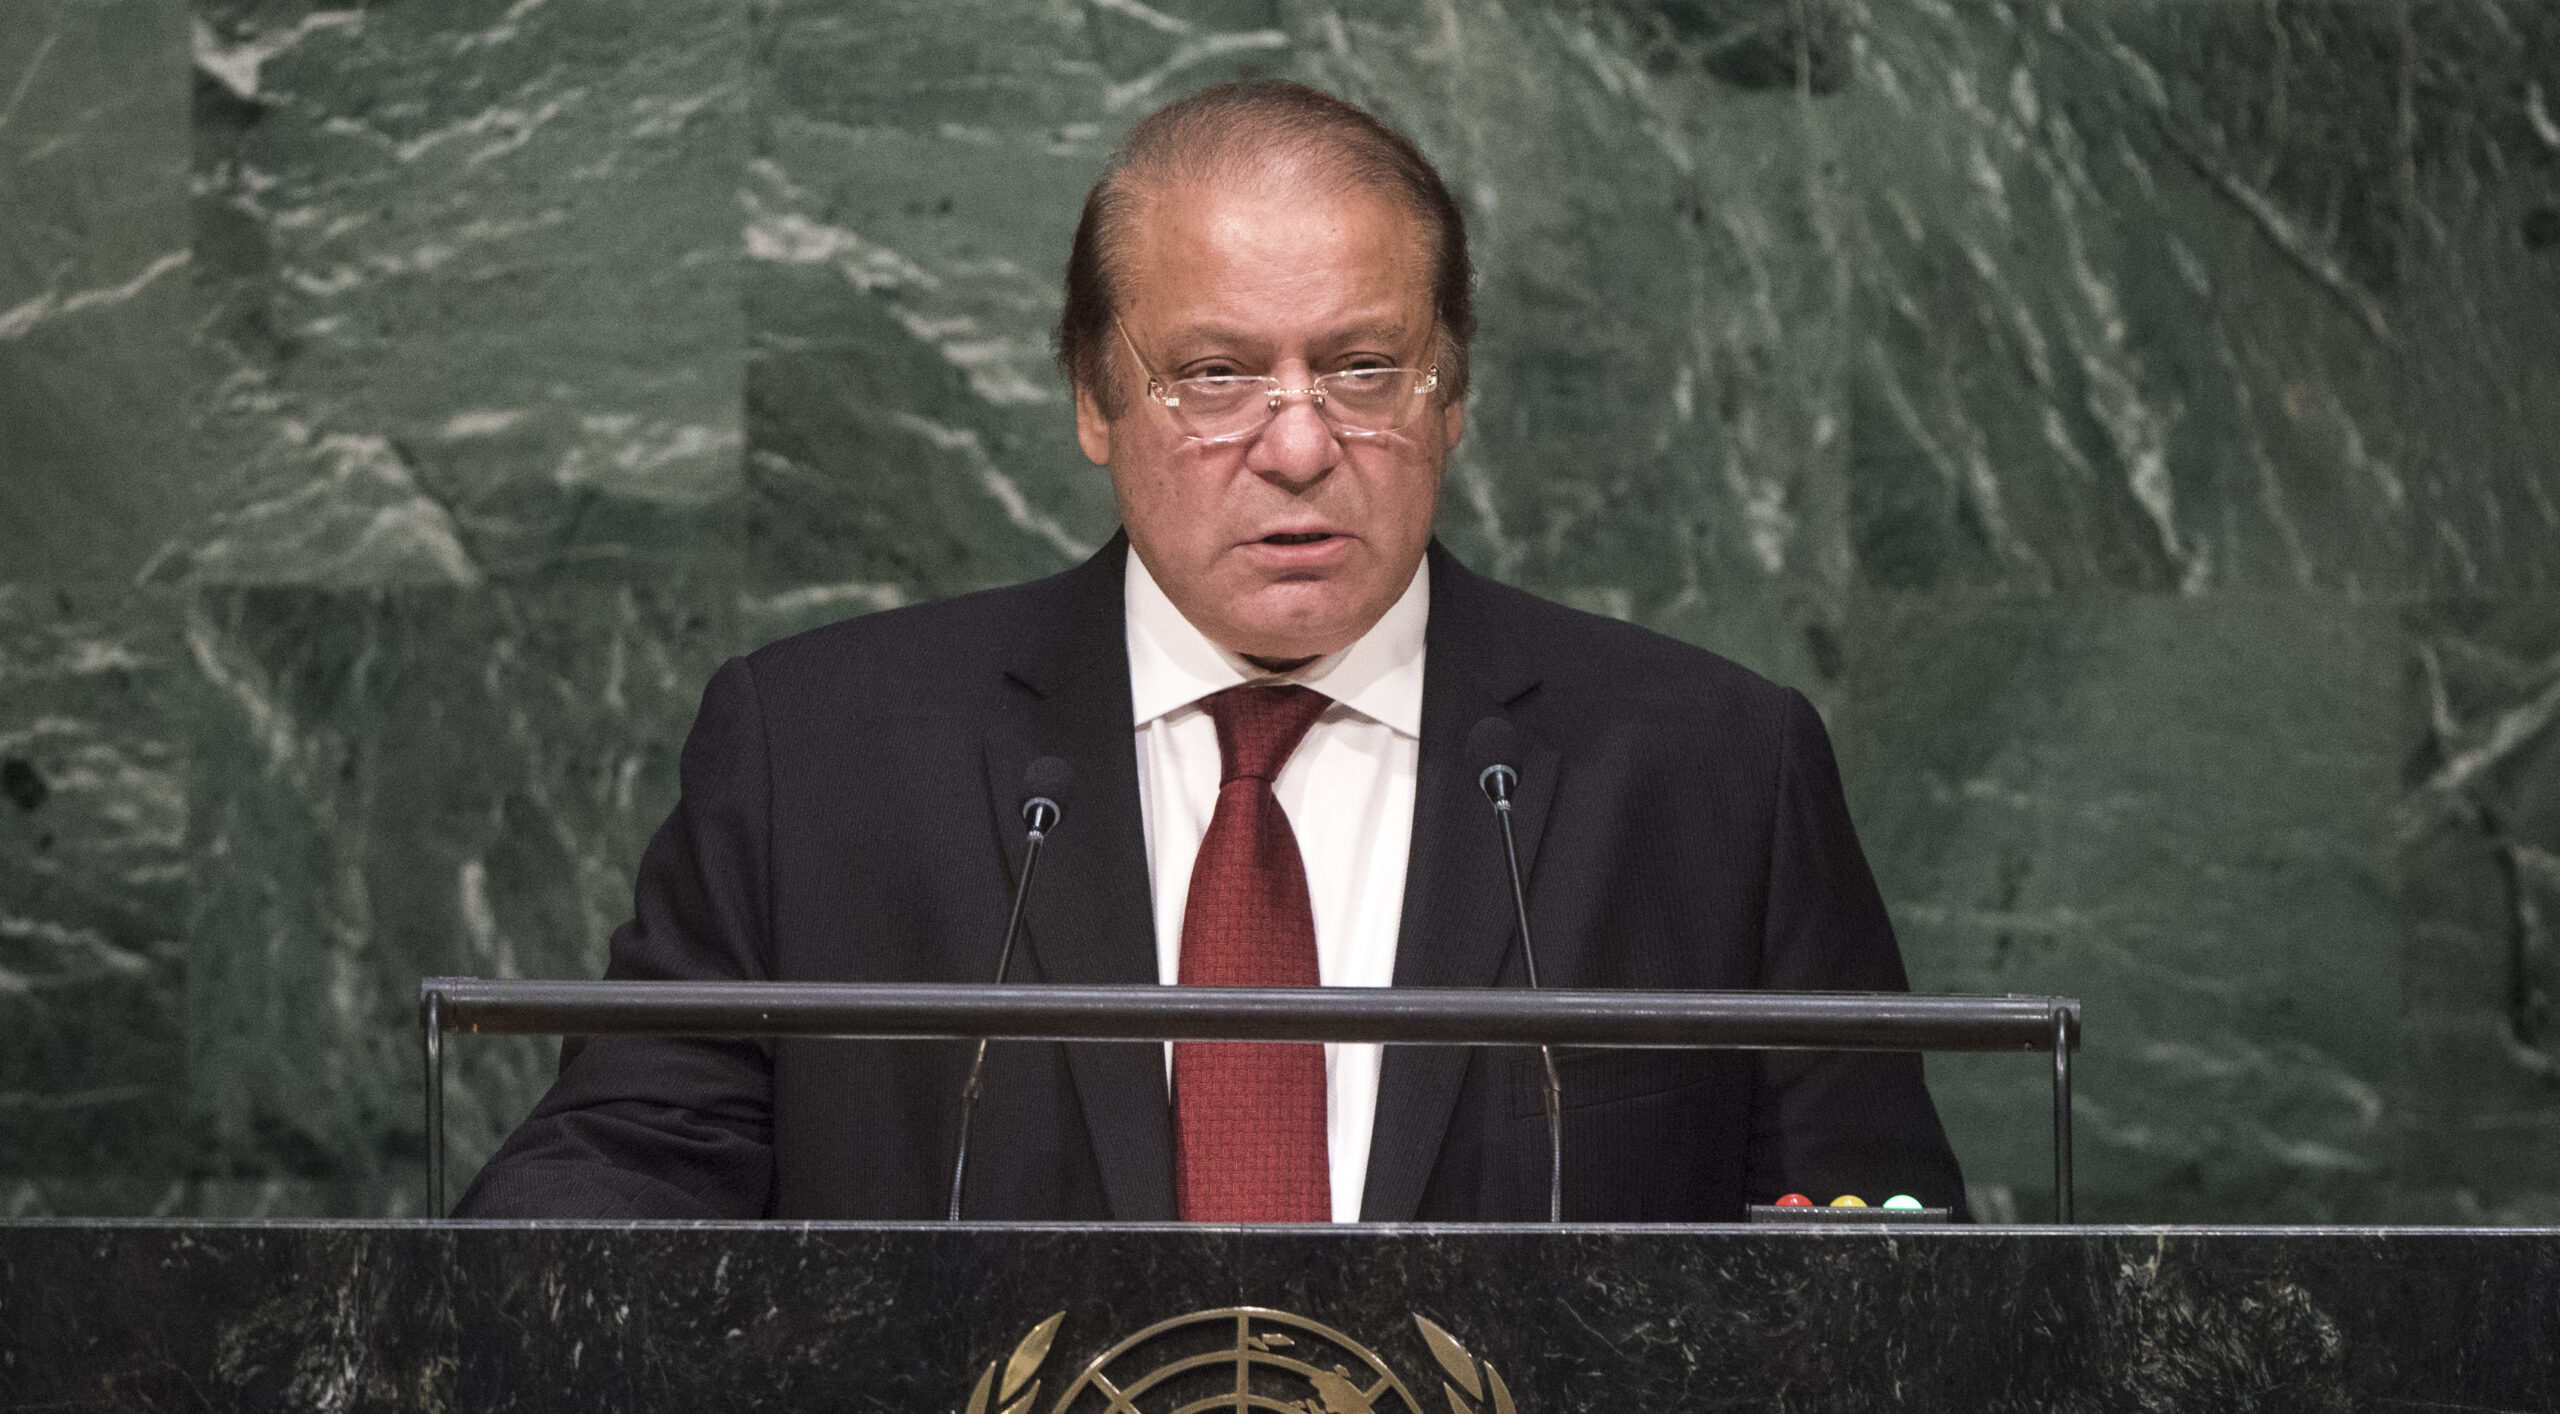 Statement by His Excellency Muhammad Nawaz Sharif, Prime Minister of the Islamic Republic of Pakistan